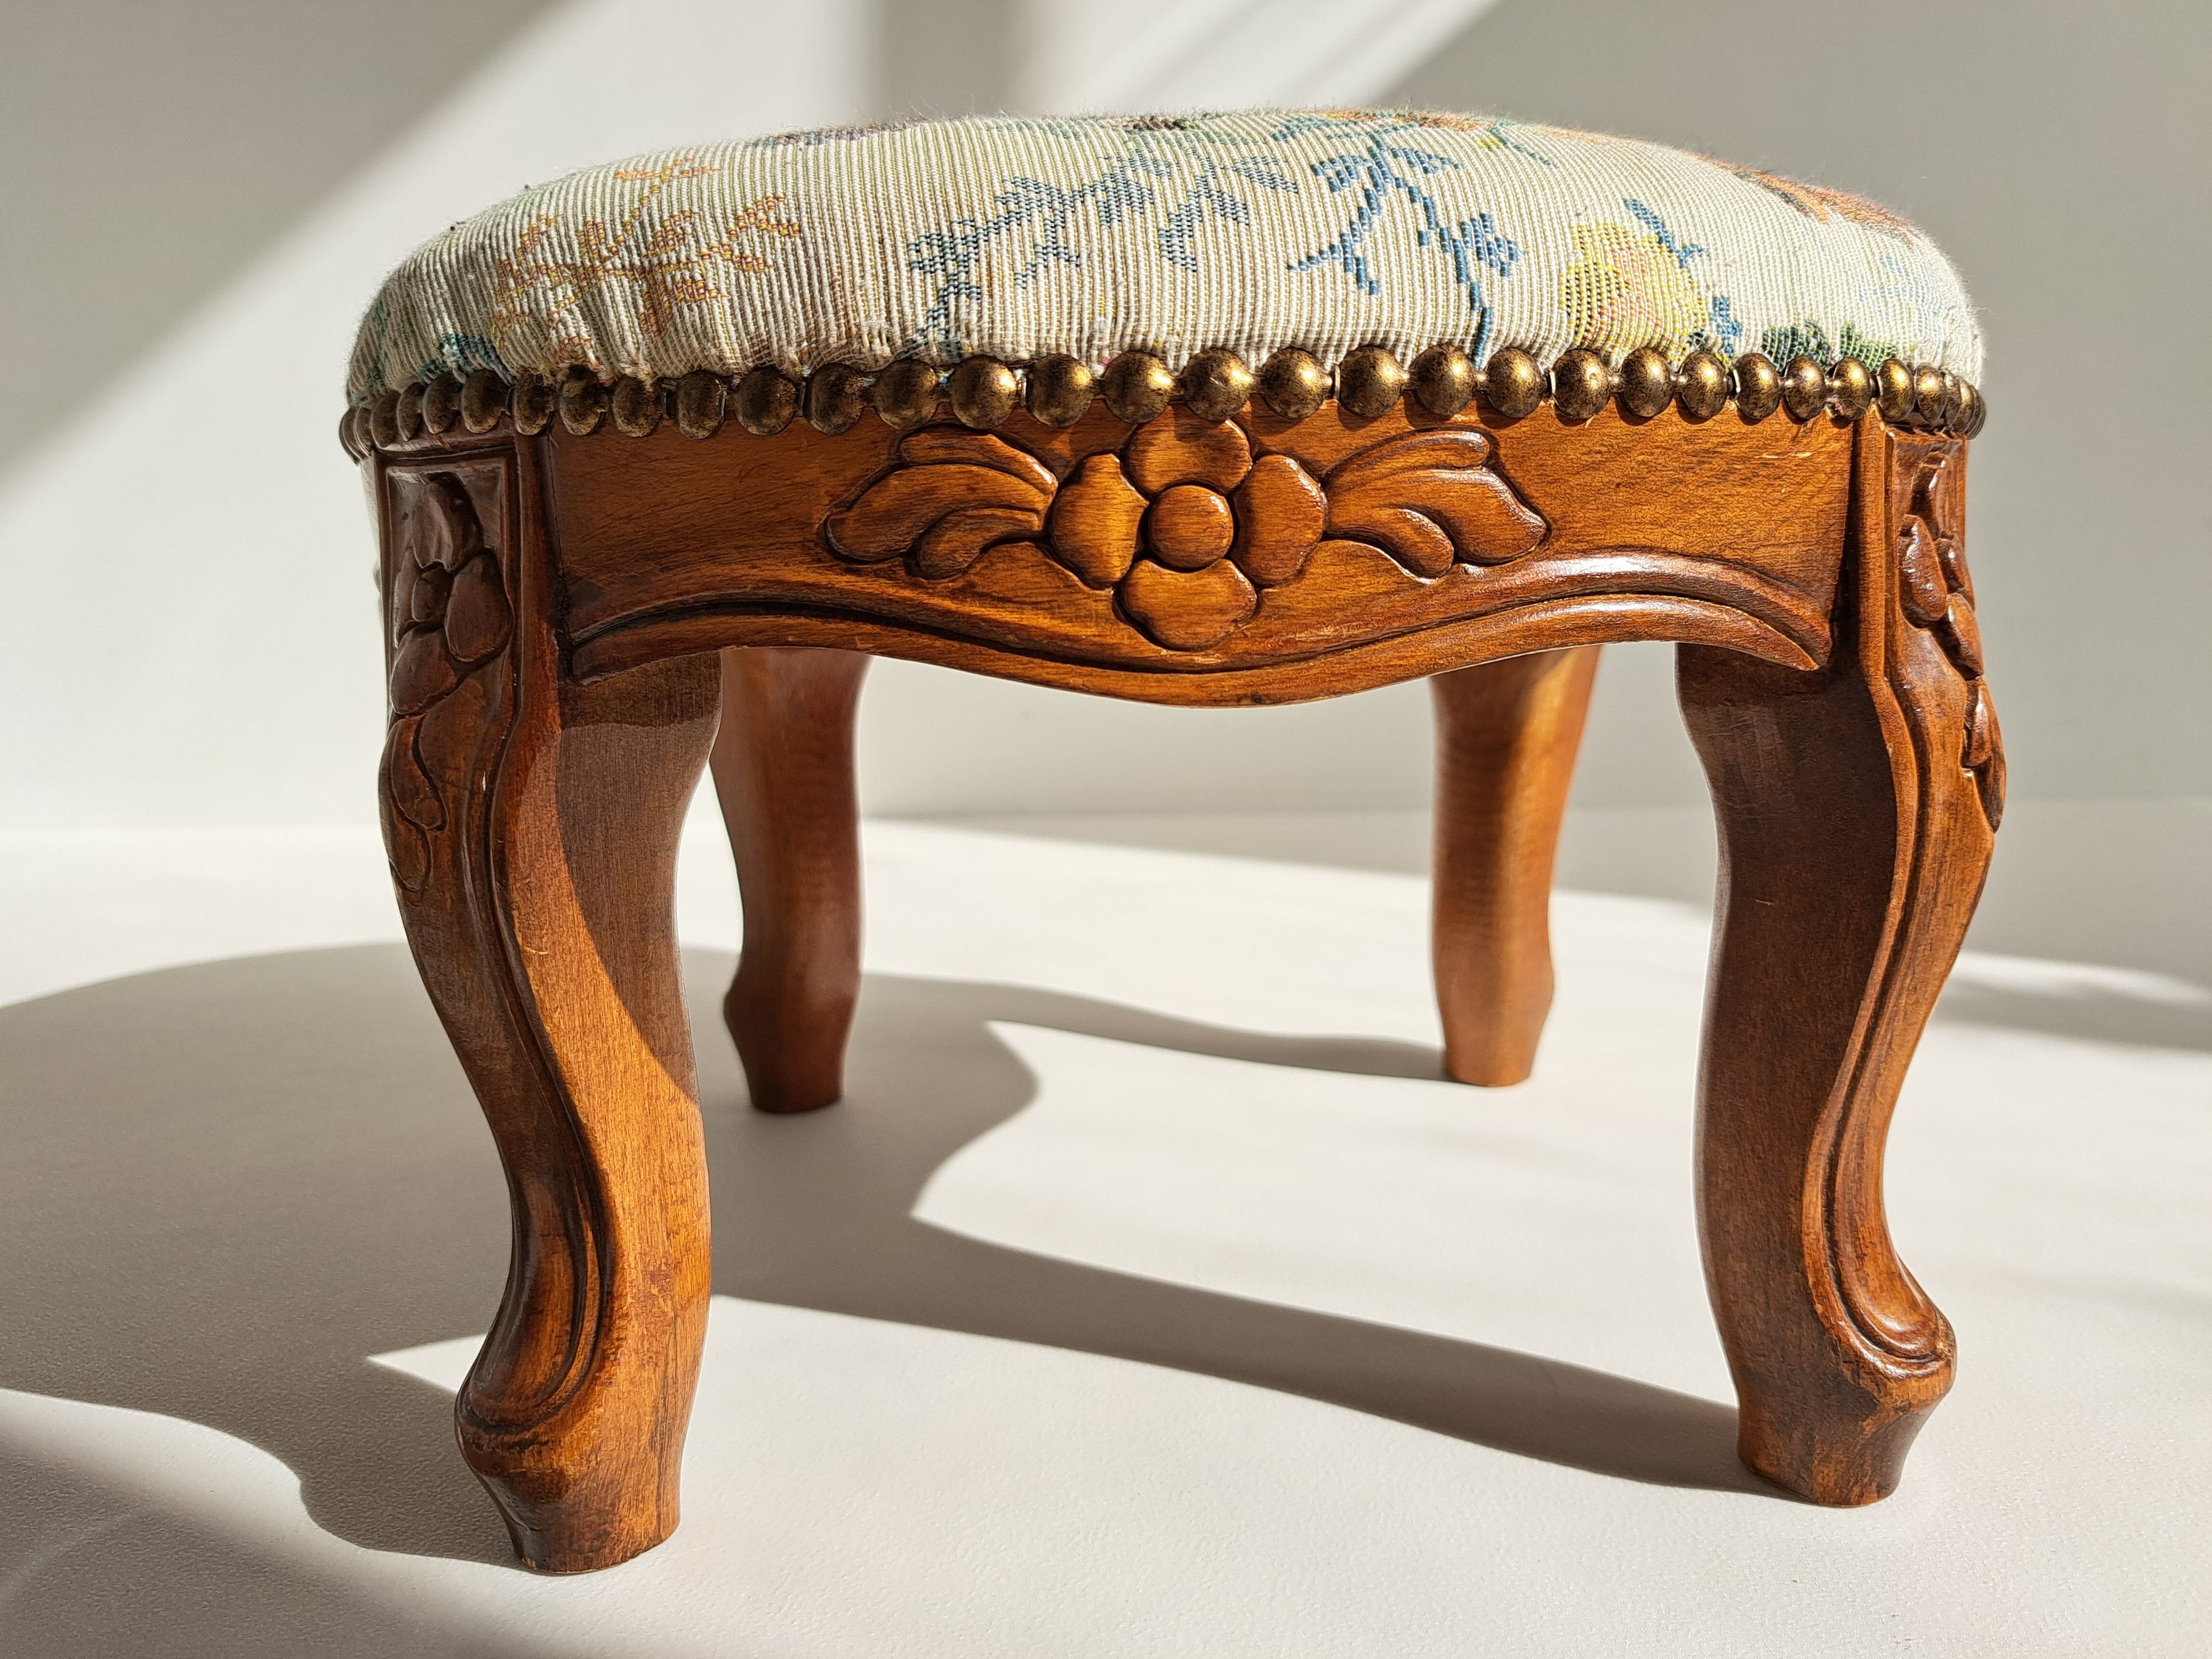 Antique Foot Stool Made Of Solid Wood With Floral Carvings - Original  Antique Furniture